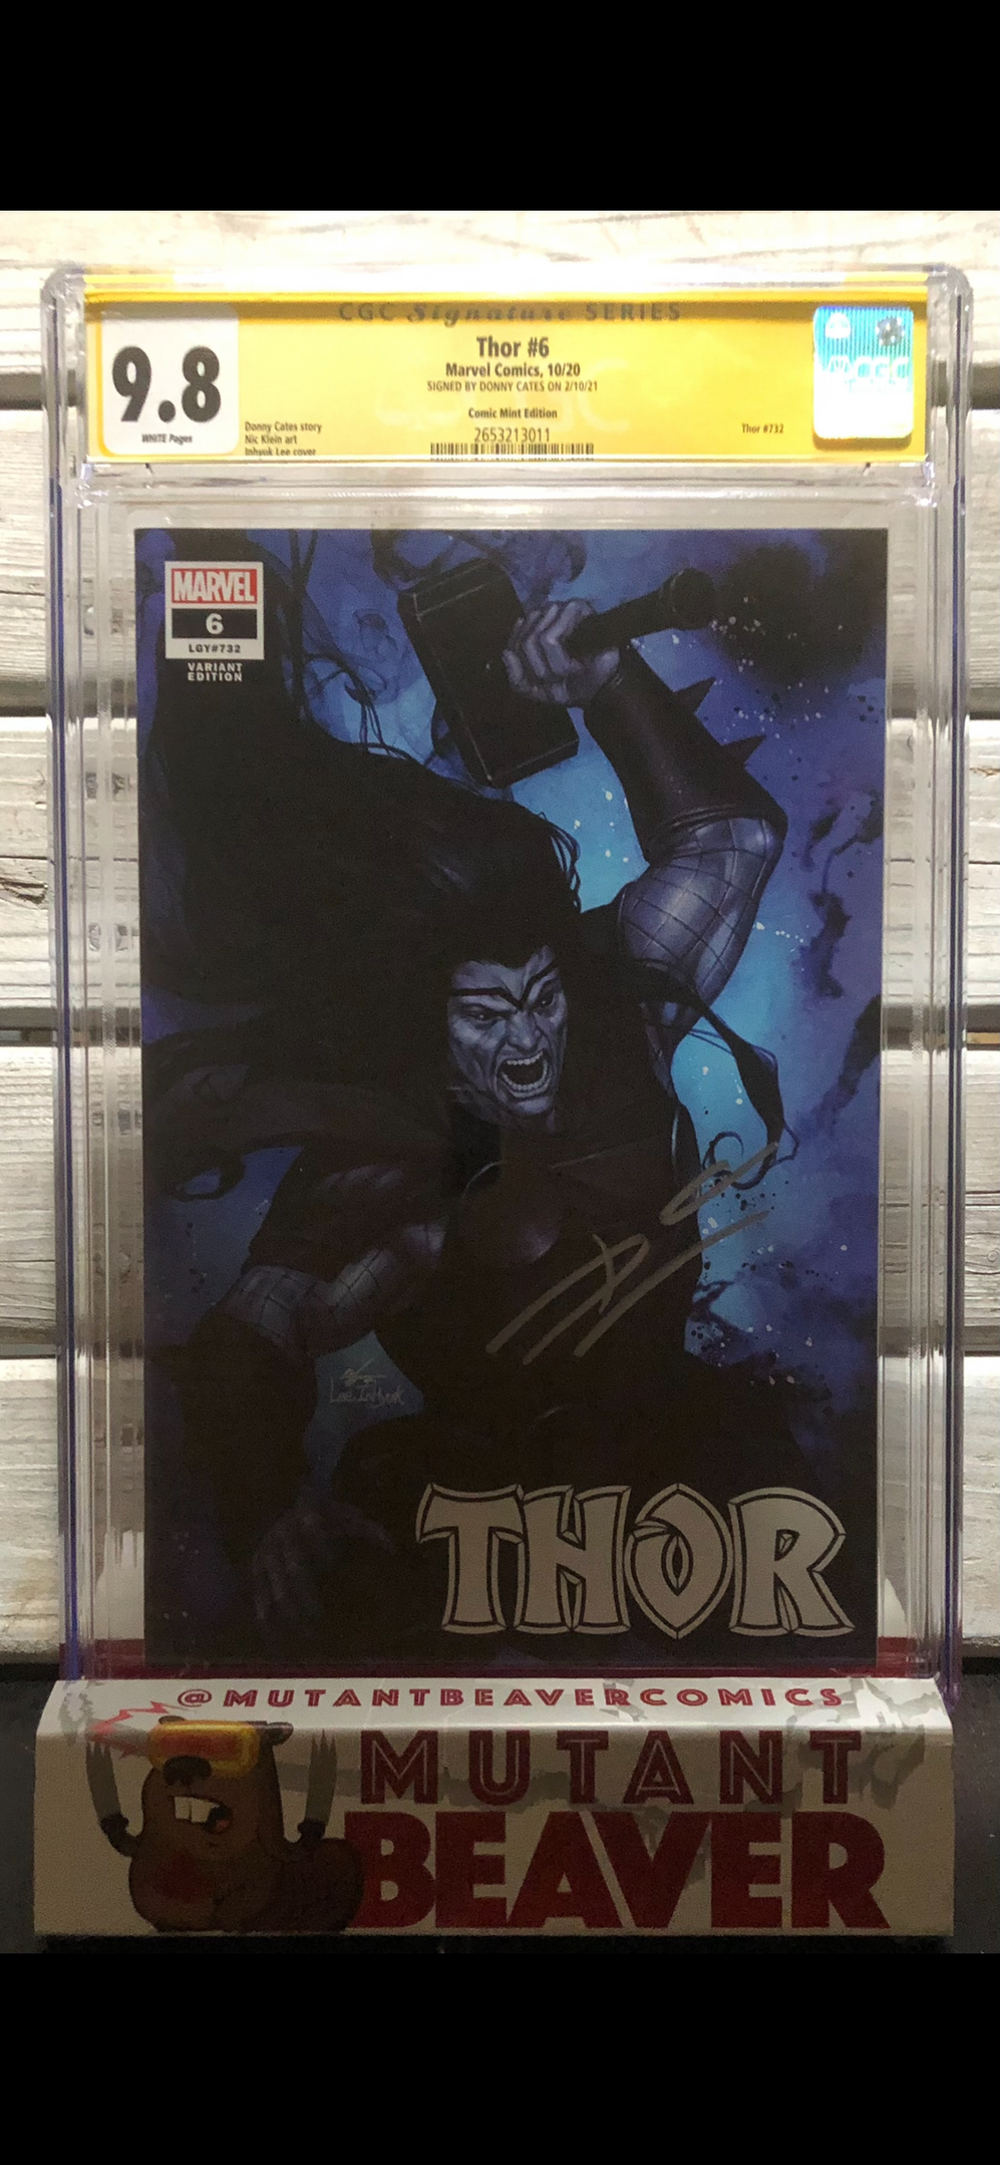 CGC 9.8 (Donny Cates) SS THOR #6 Inhyuk Lee TRADE DRESS EXCLUSIVE